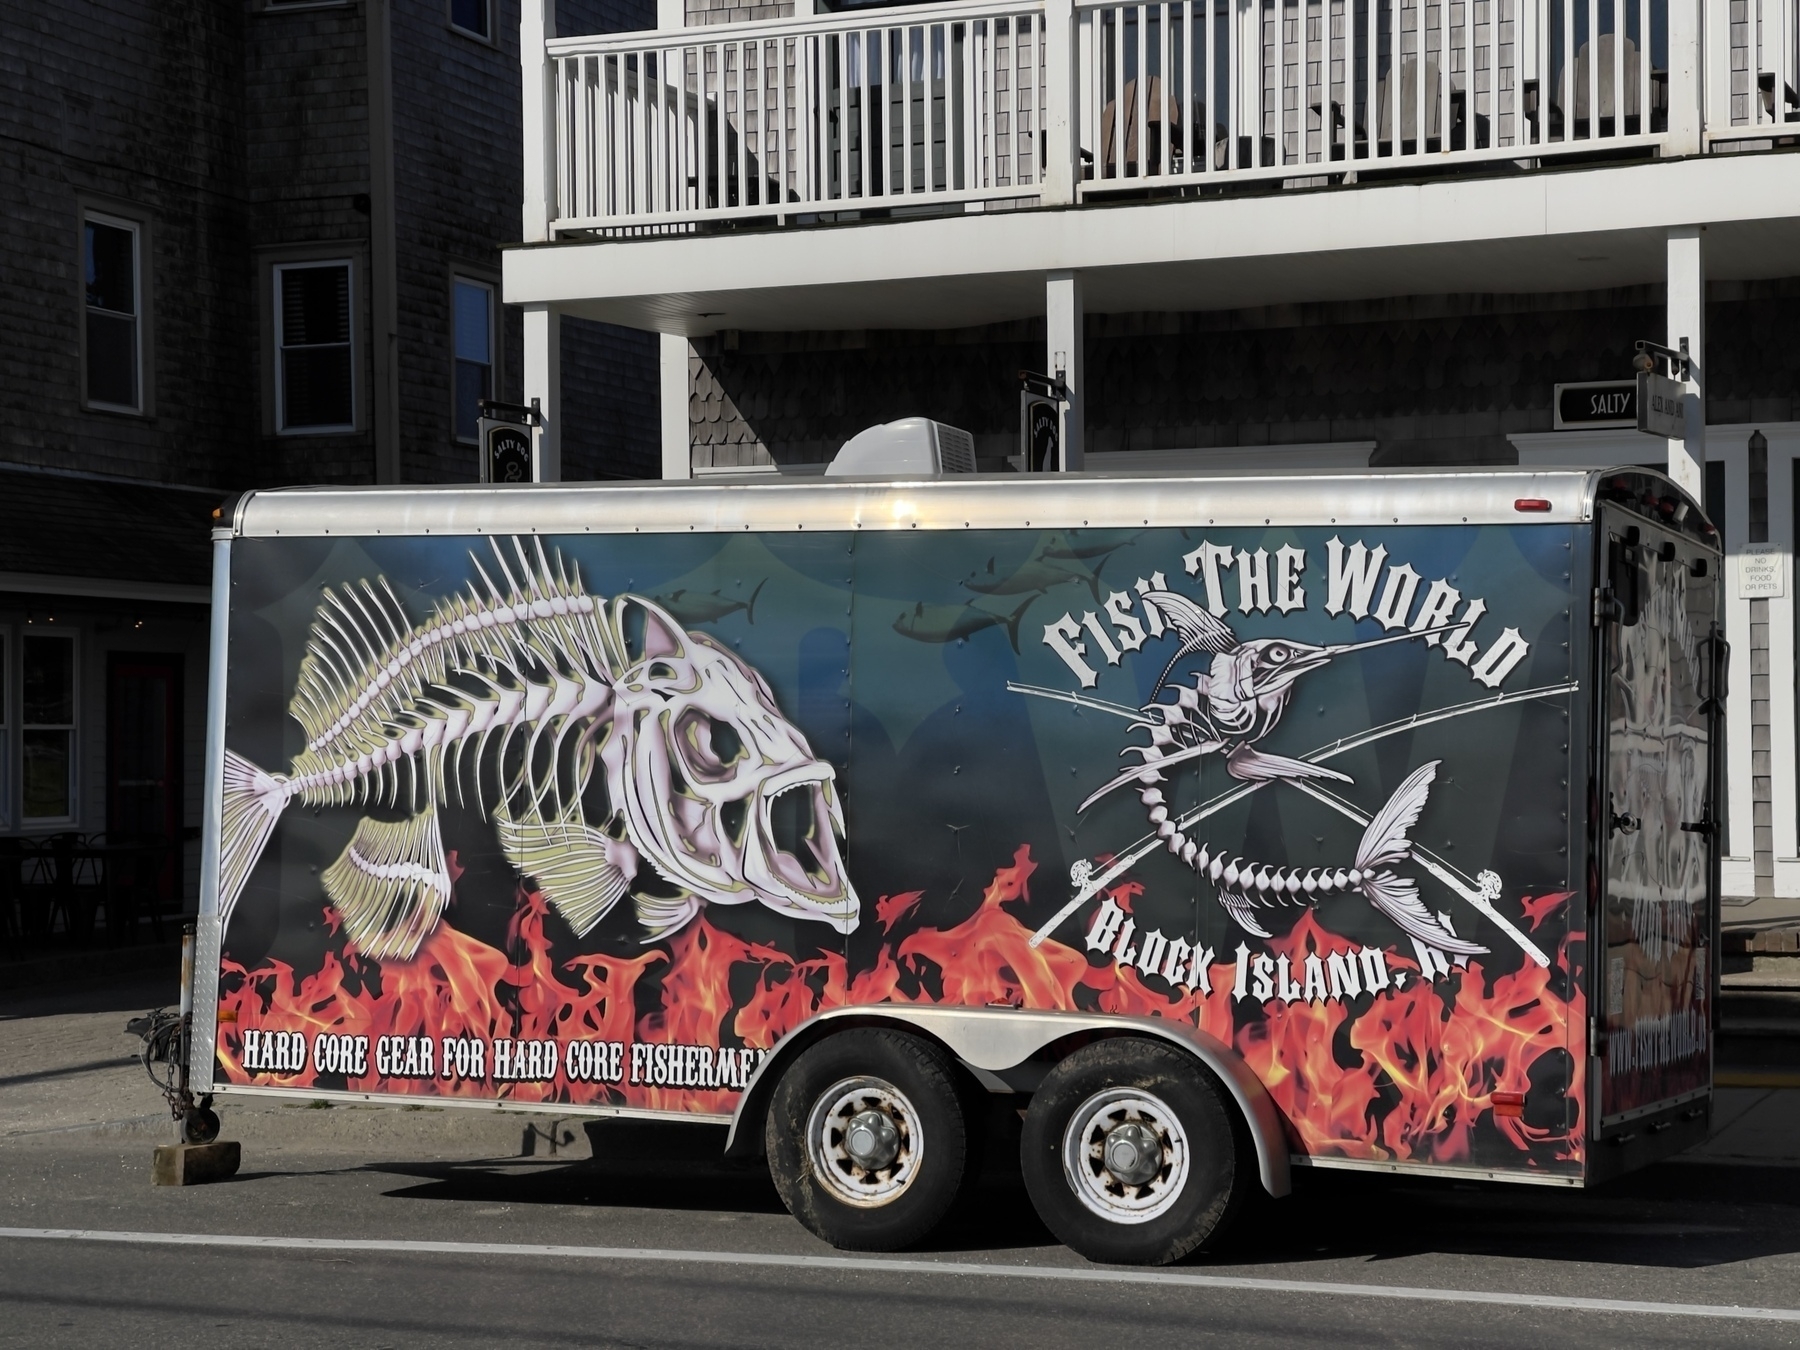 Fish The World trailer parked on street.